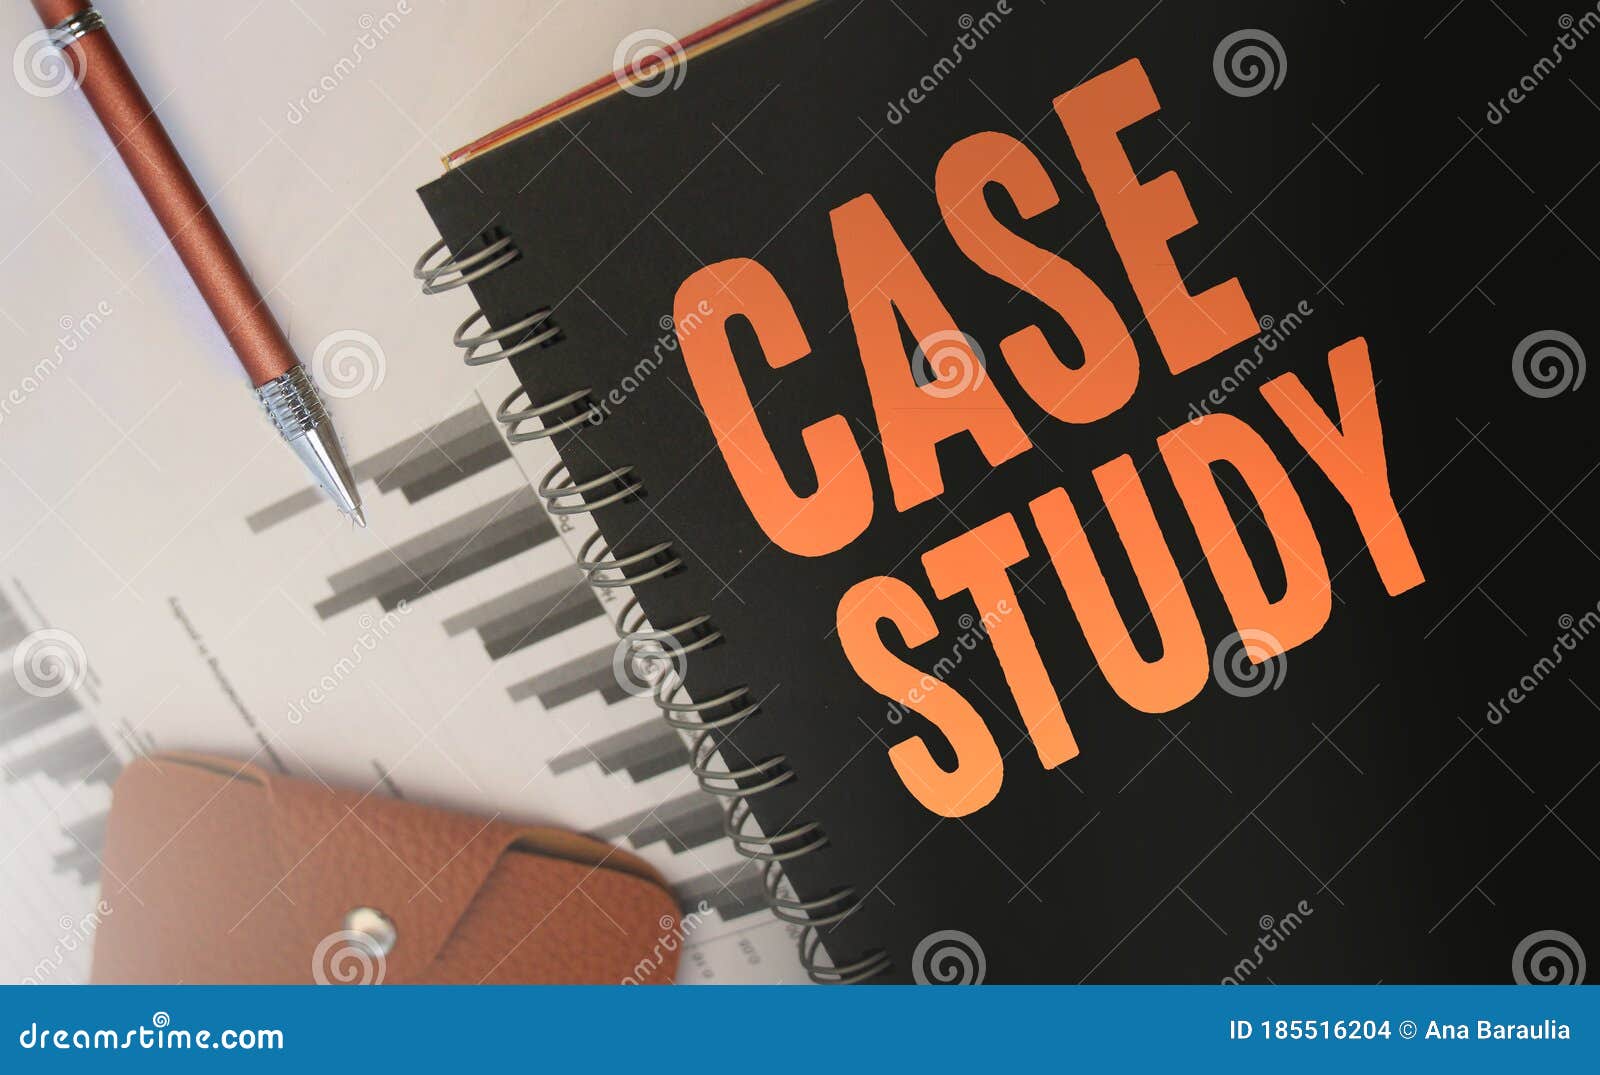 case studies text written on a diary cover orange on black. business concept. selective focus